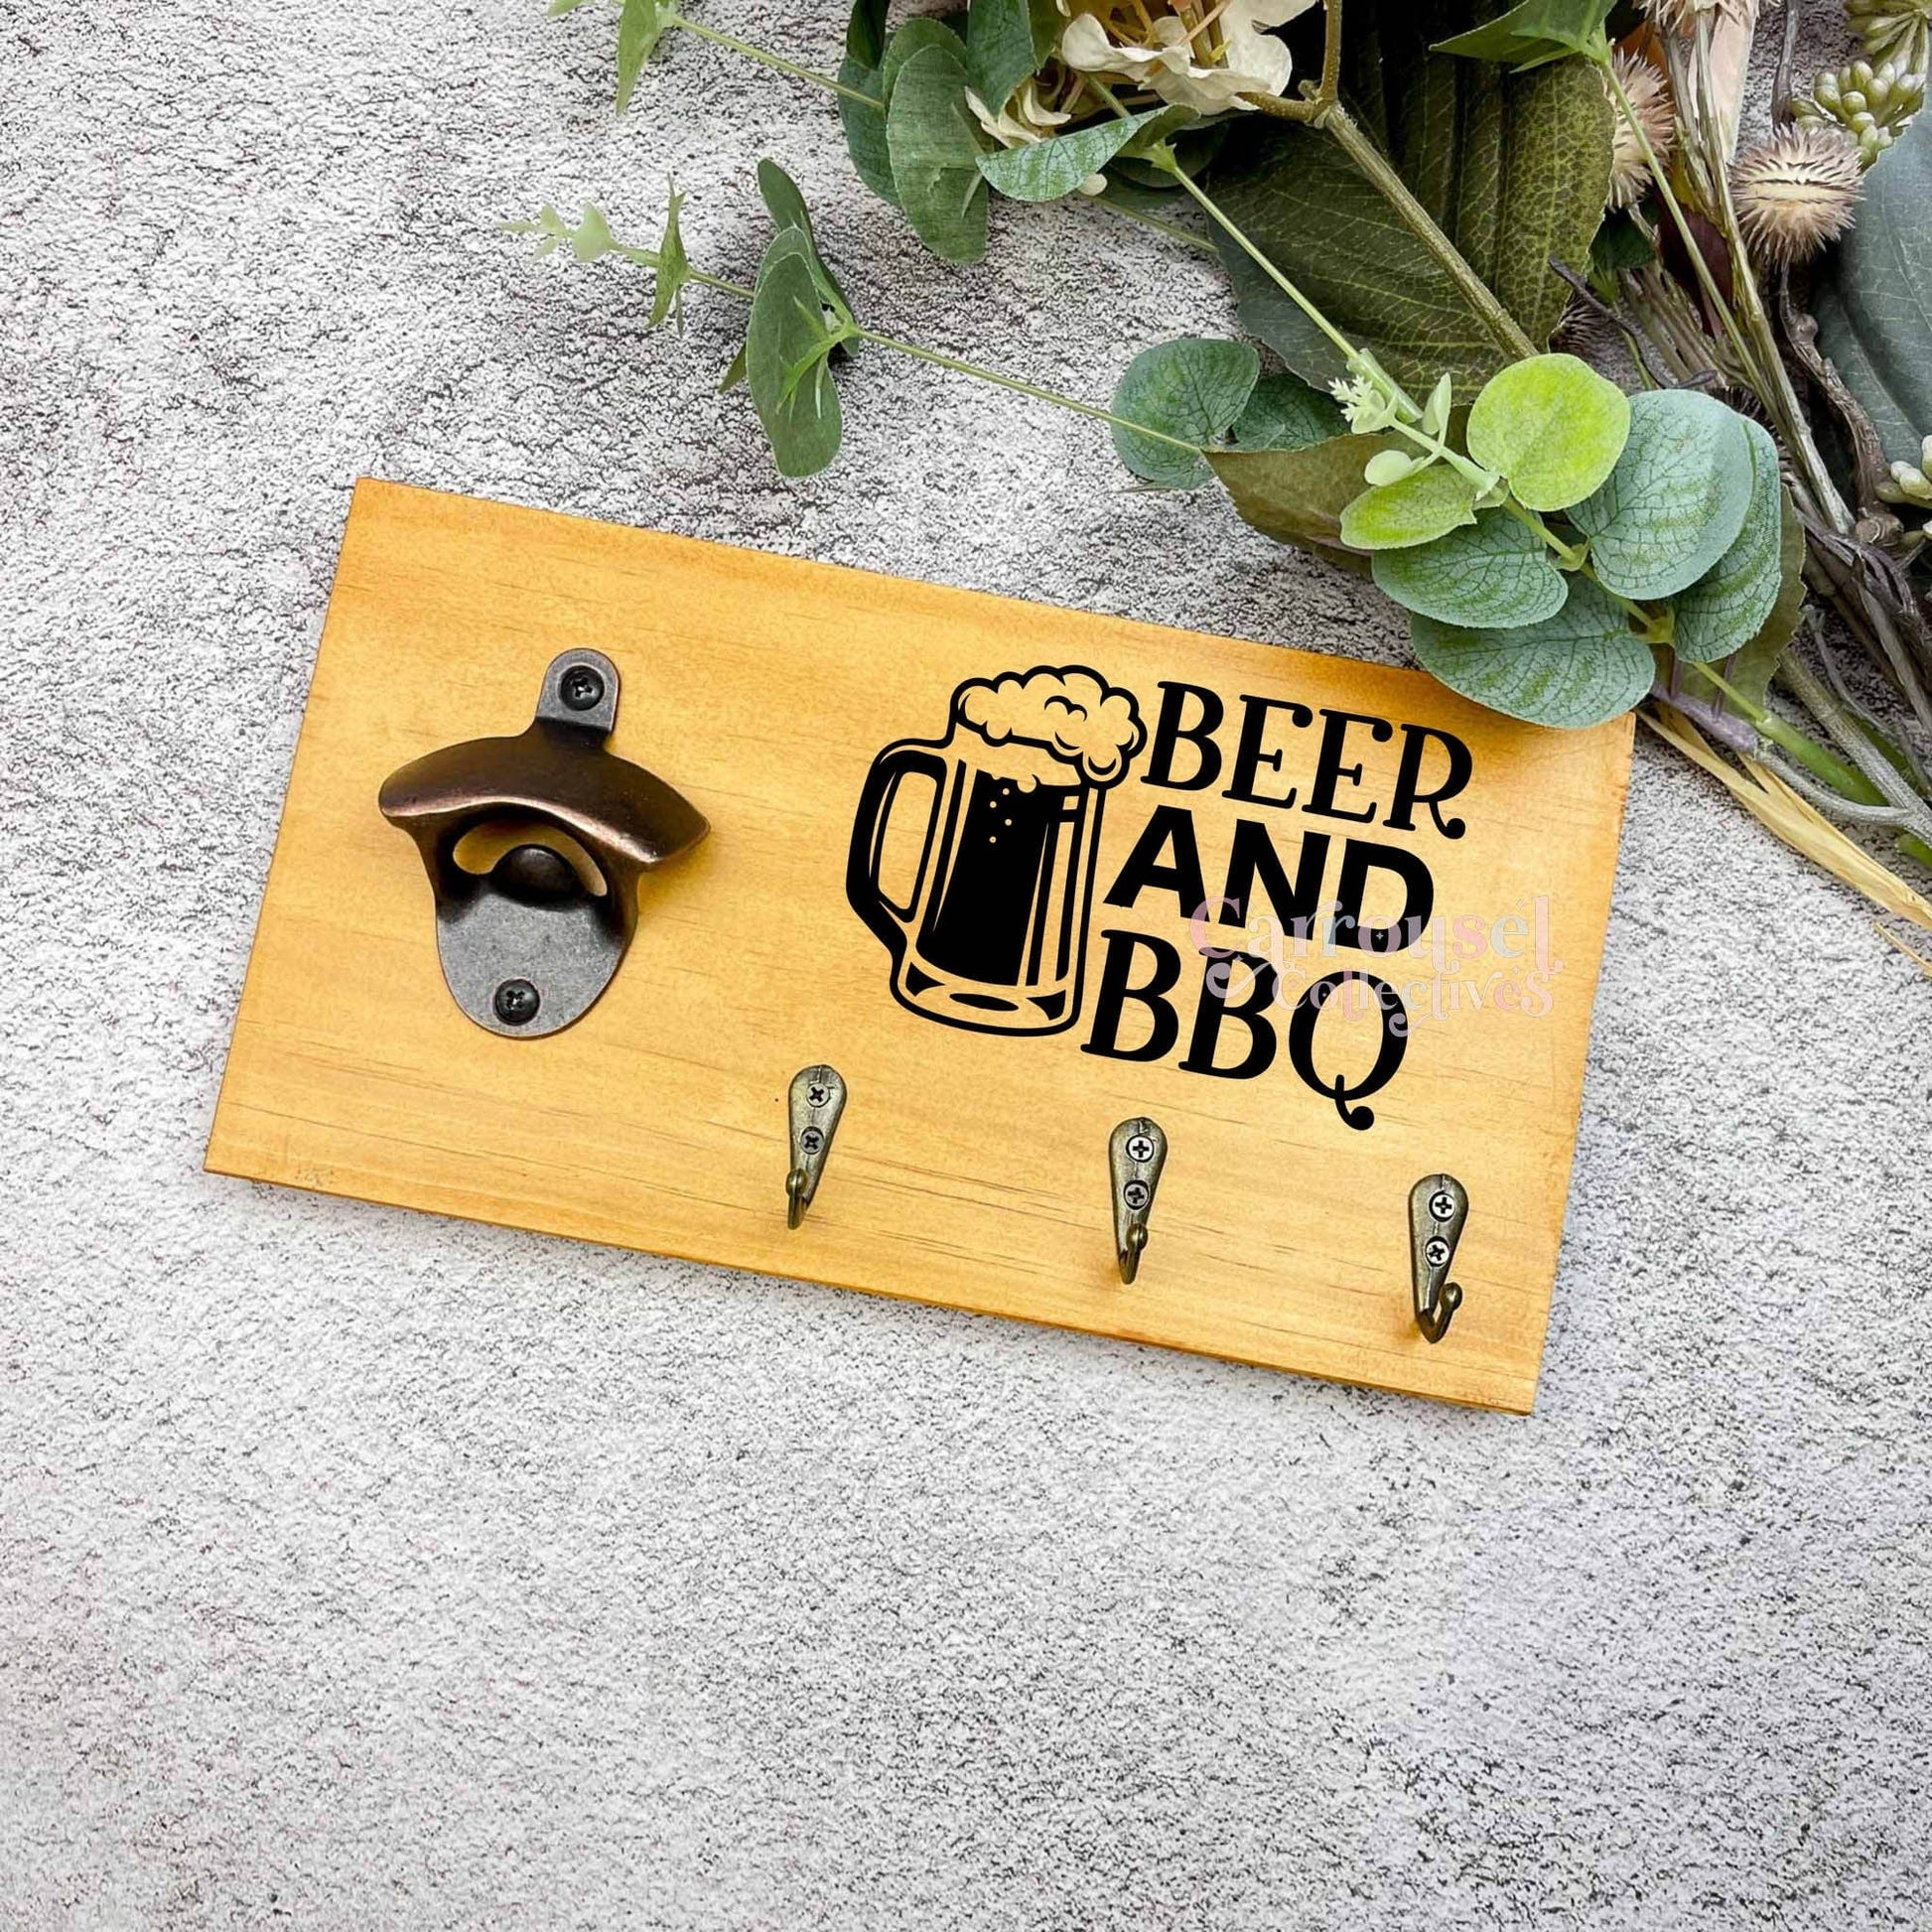 Beer and BBQ Grill sign, Bottle opener sign